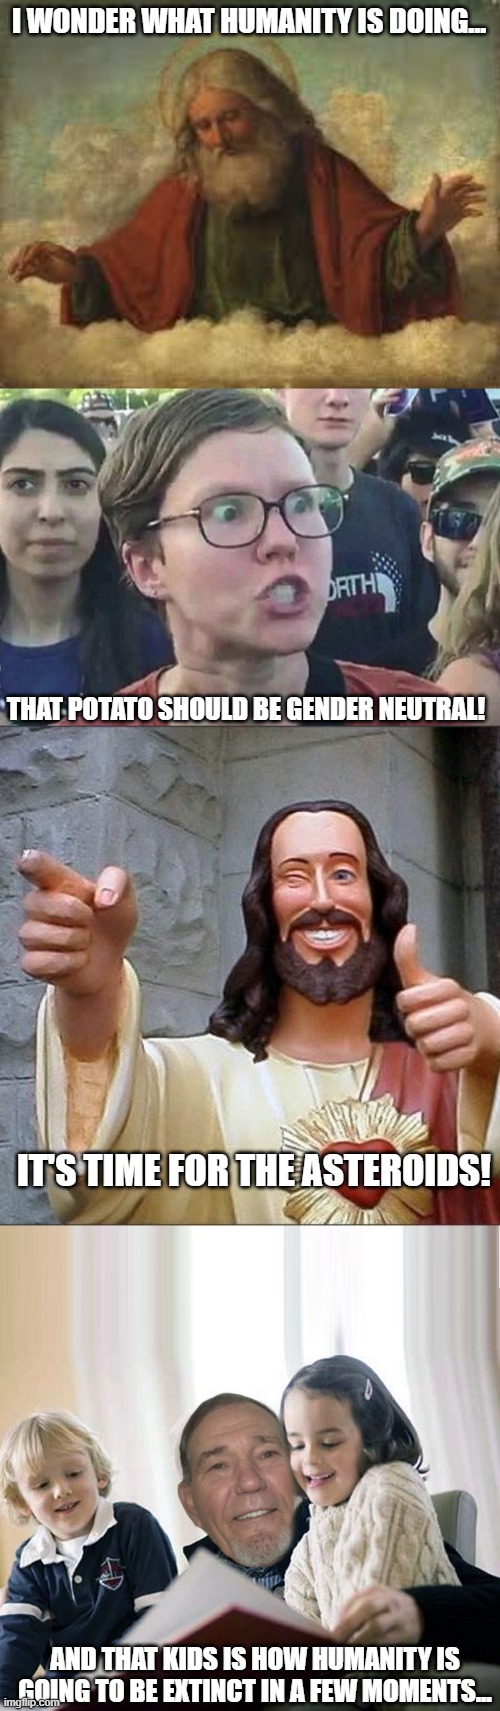 It's that time | I WONDER WHAT HUMANITY IS DOING... THAT POTATO SHOULD BE GENDER NEUTRAL! IT'S TIME FOR THE ASTEROIDS! AND THAT KIDS IS HOW HUMANITY IS GOING TO BE EXTINCT IN A FEW MOMENTS... | image tagged in god,triggered liberal,jesus says,story teller | made w/ Imgflip meme maker